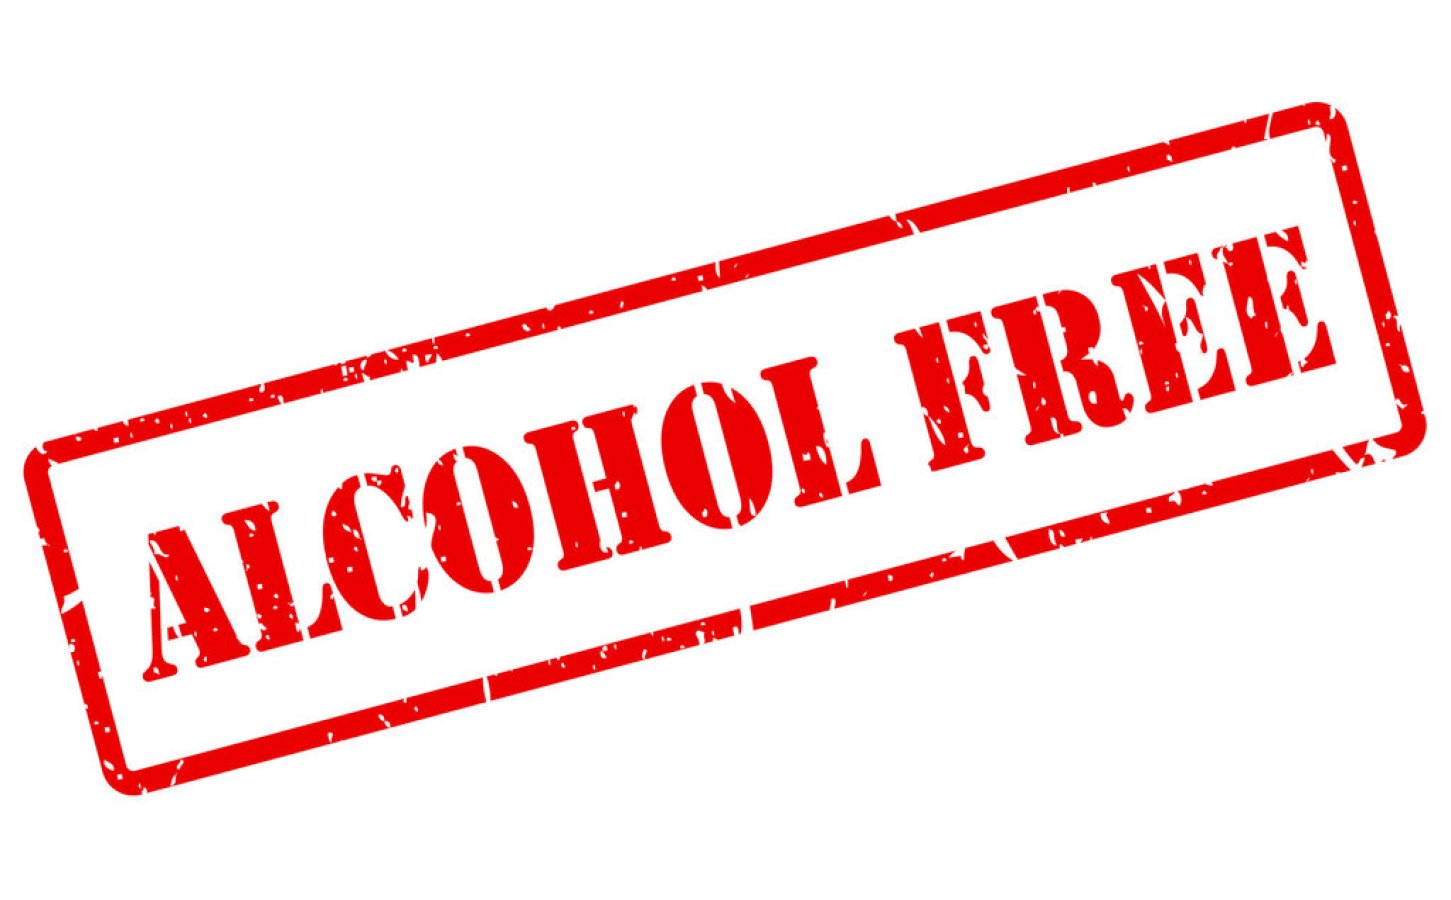 Are alcohol-free beverages the new trend in the drinking game?